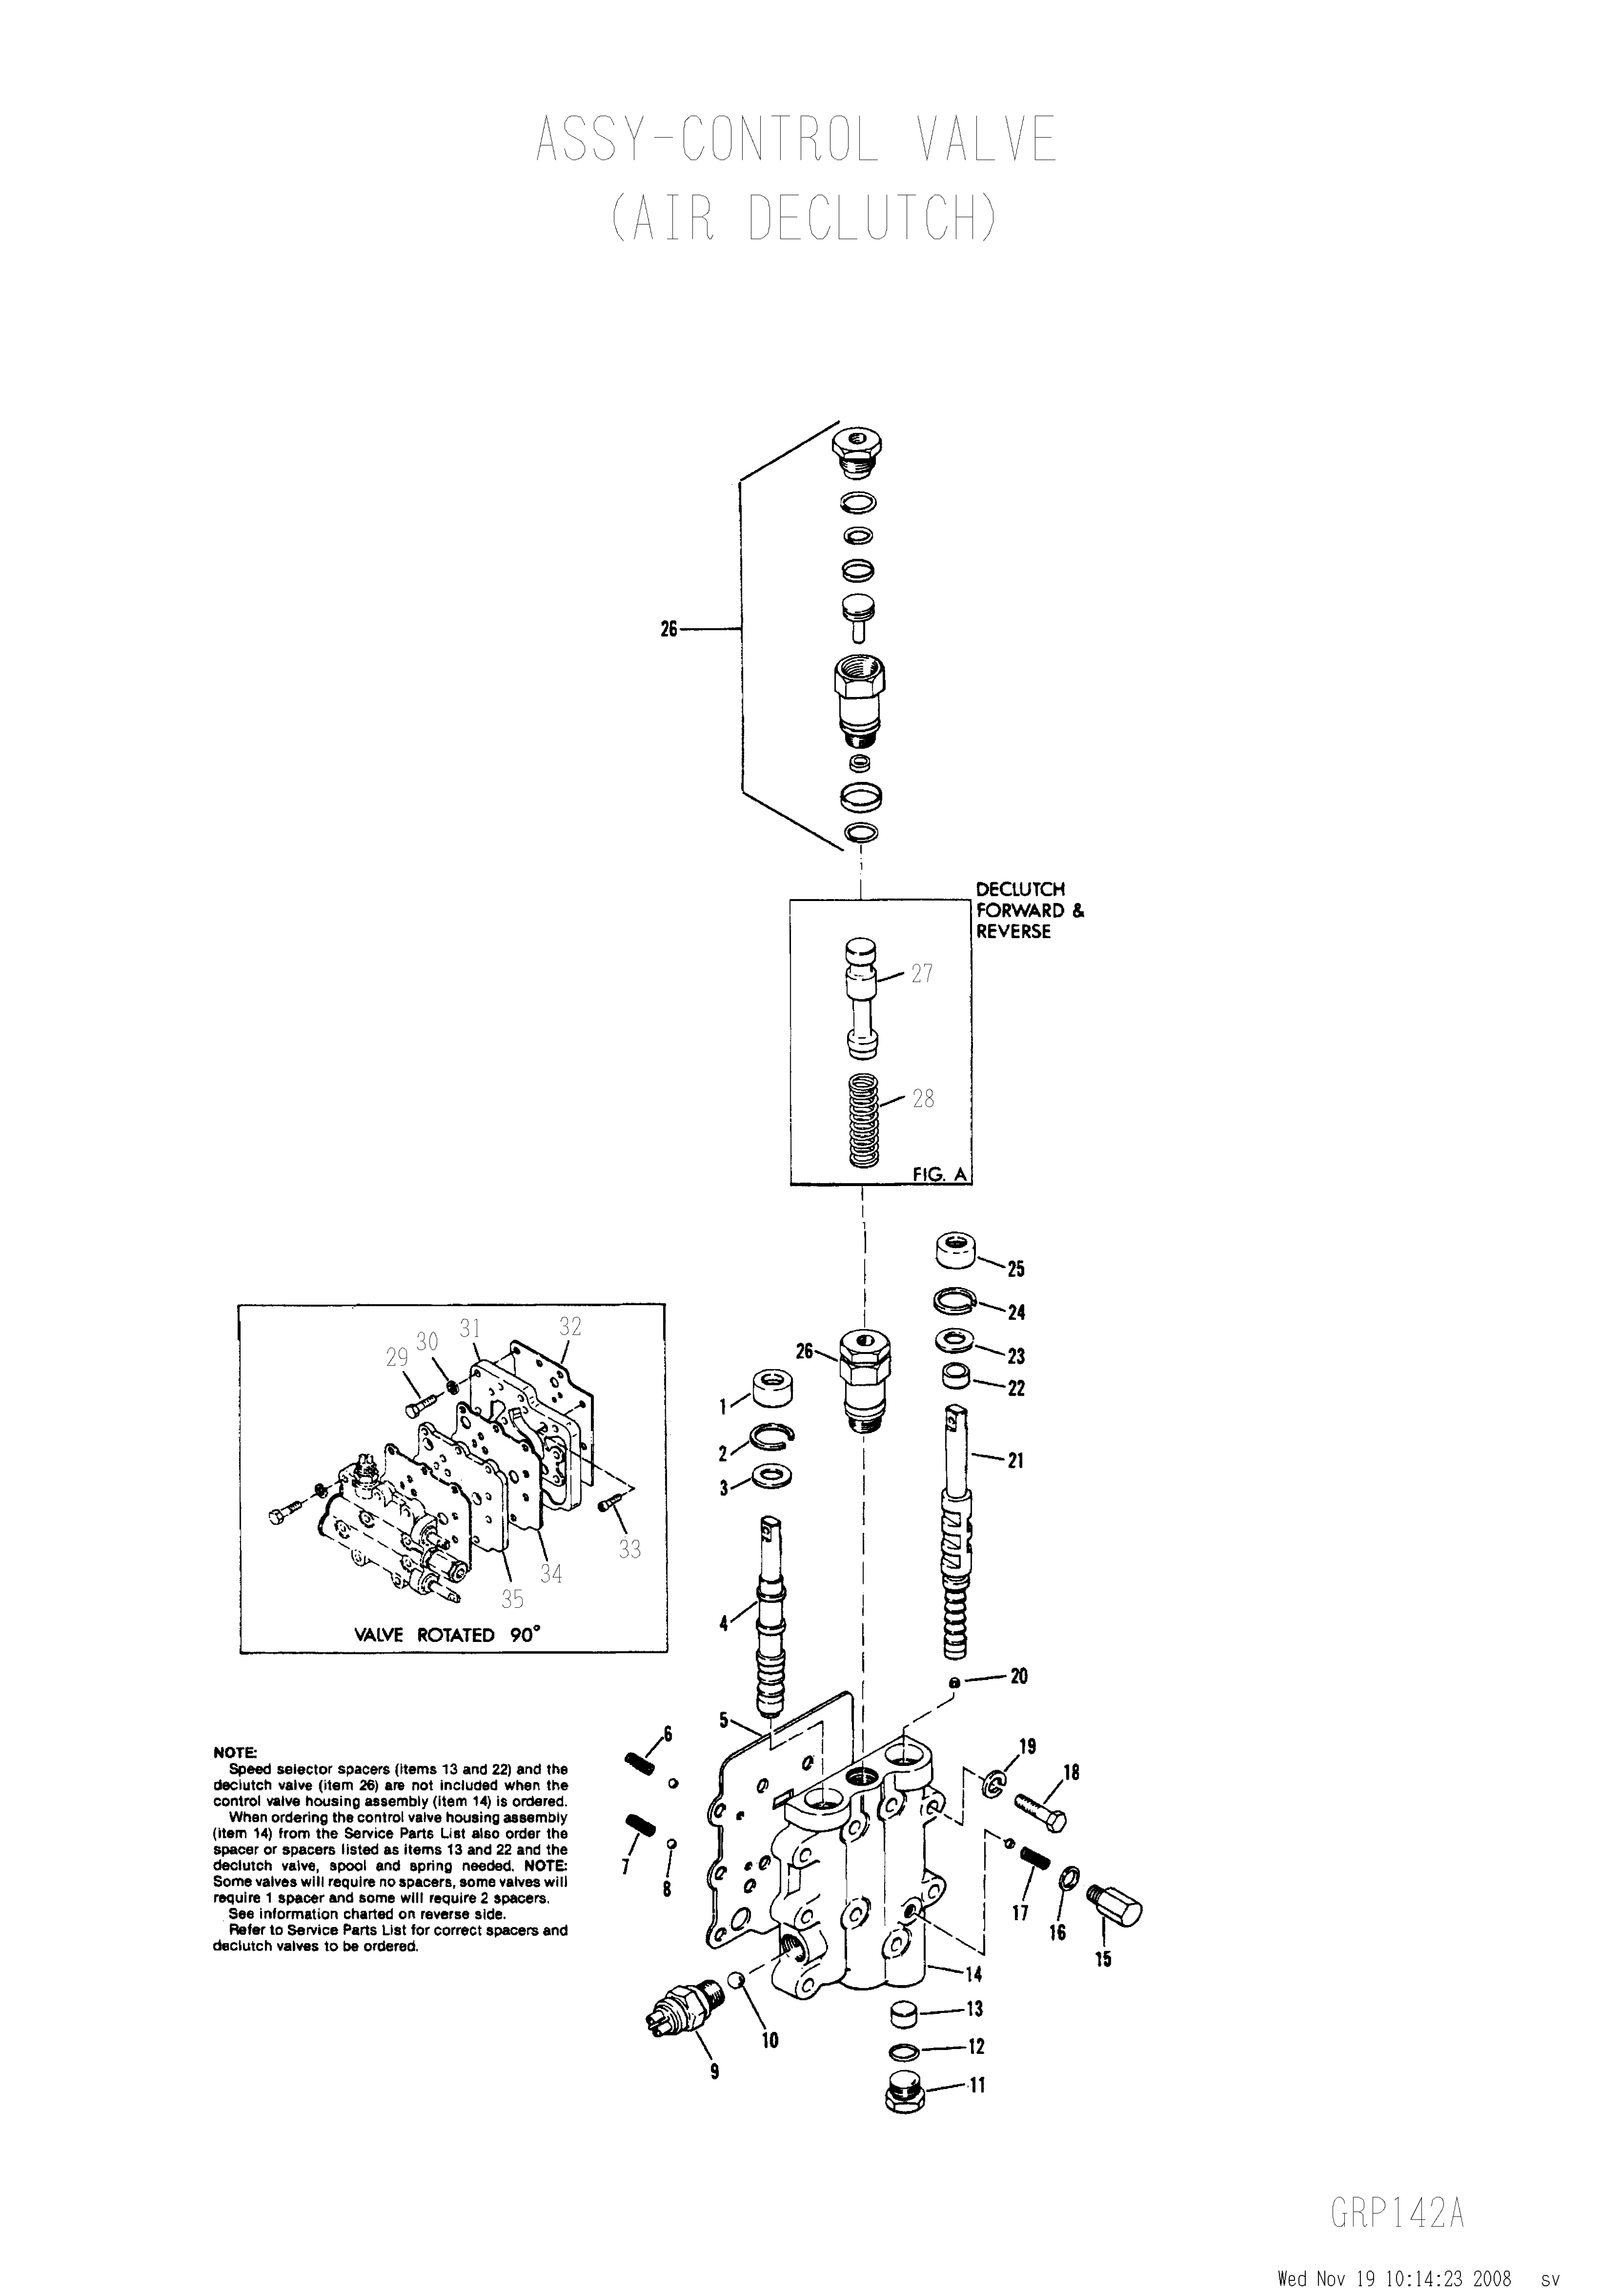 drawing for SANDVIK 0302038 - PLATE-CONTROL VALVE MOUNTING (figure 5)